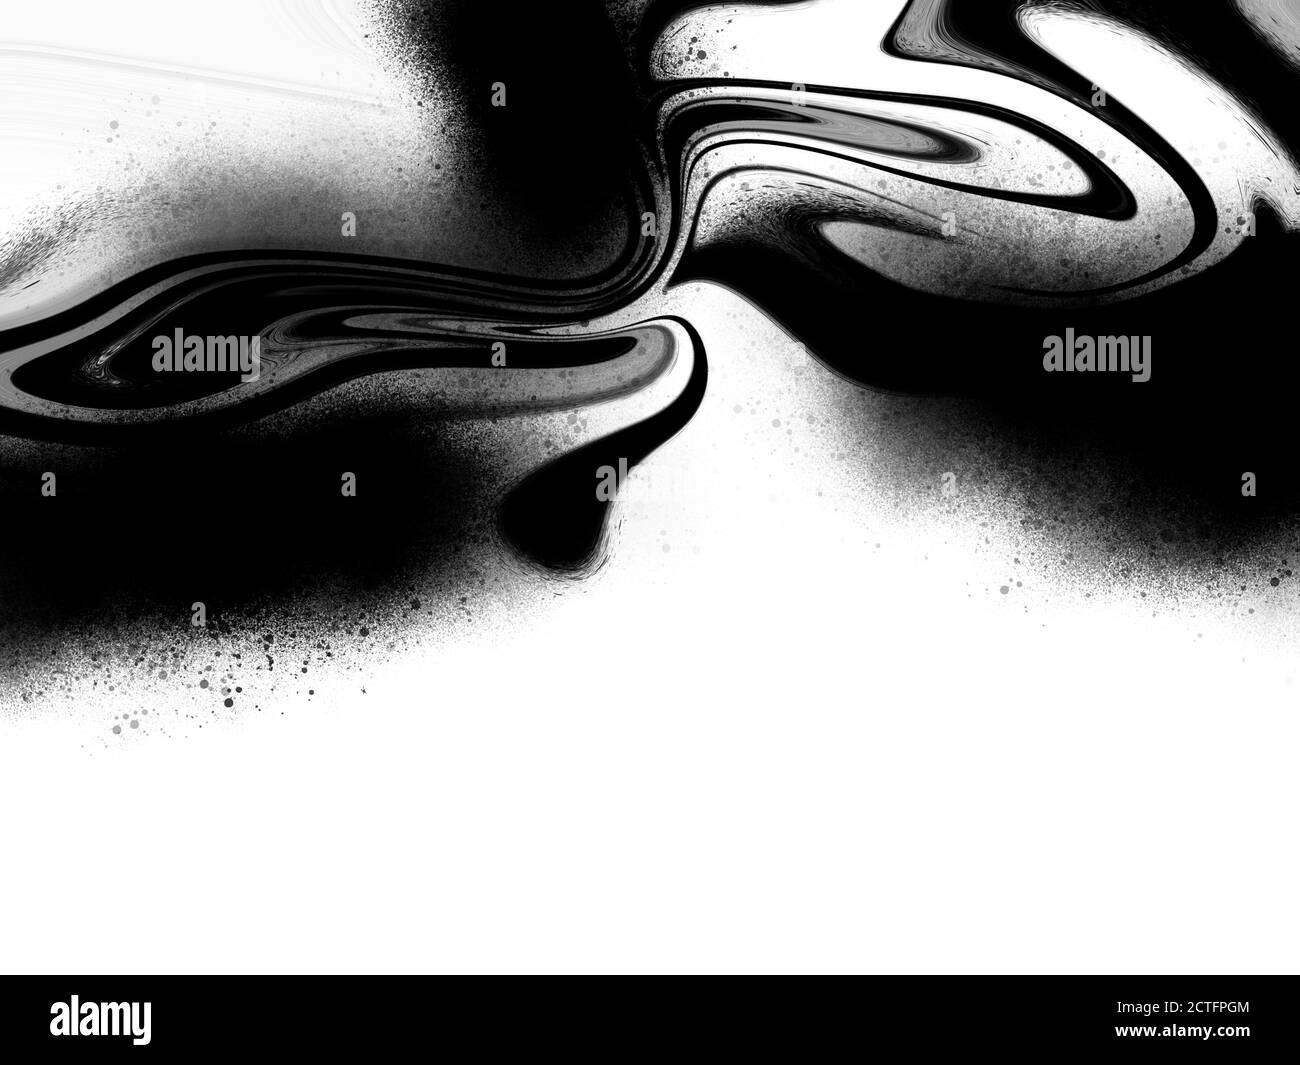 https://c8.alamy.com/comp/2CTFPGM/abstract-black-and-white-marble-like-ink-drawing-background-high-resolution-jpg-file-perfect-for-your-projects-2CTFPGM.jpg